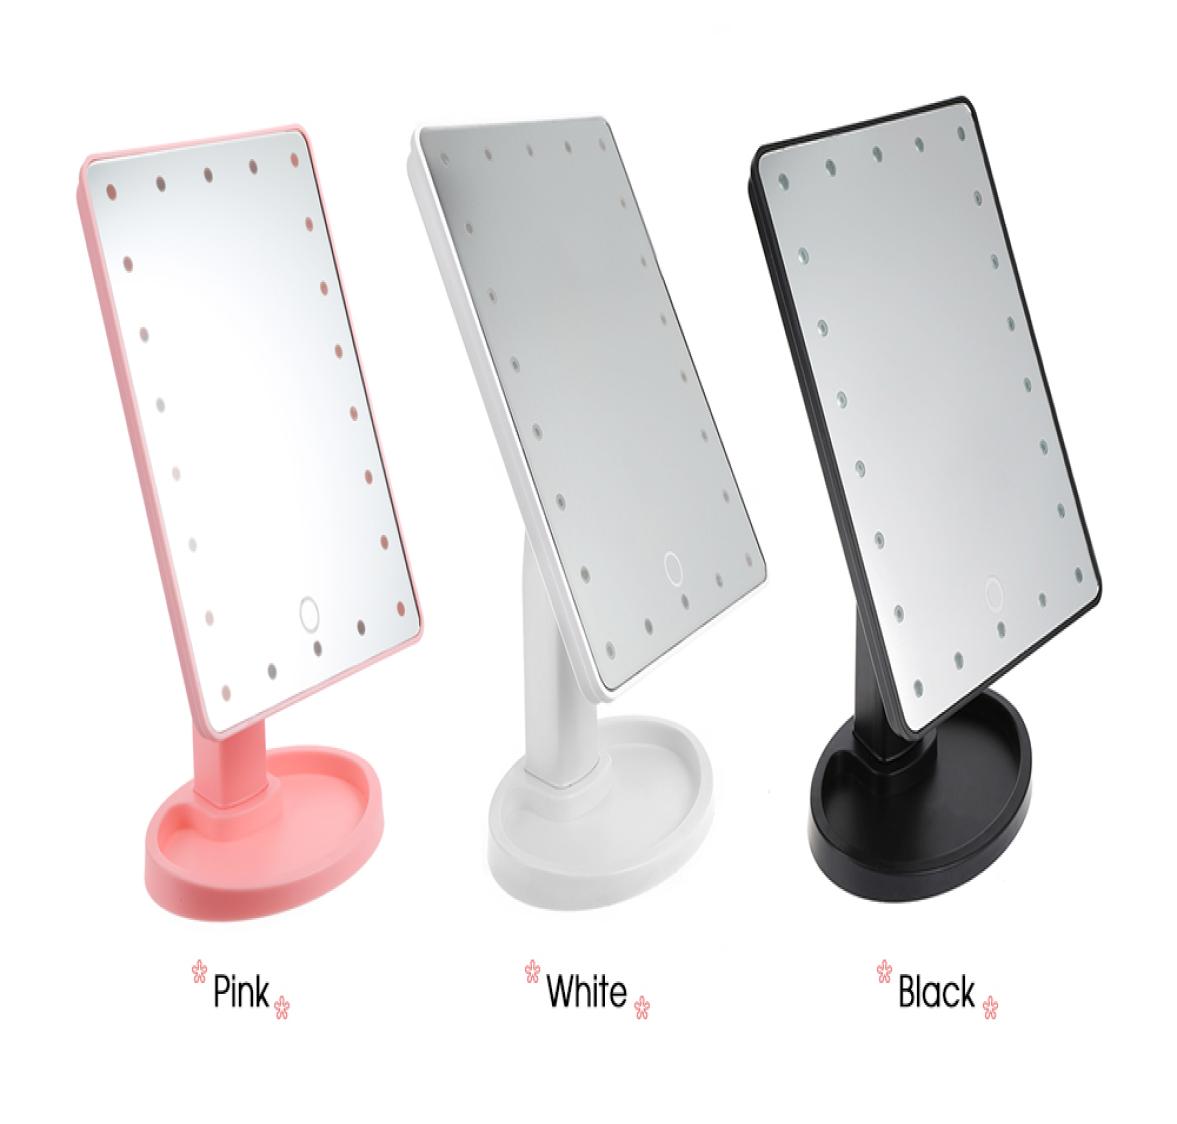 

360 Degree Rotation Touch Screen Makeup Mirror With 16 22 Led Lights Professional Vanity Mirror Table Desktop Make Up